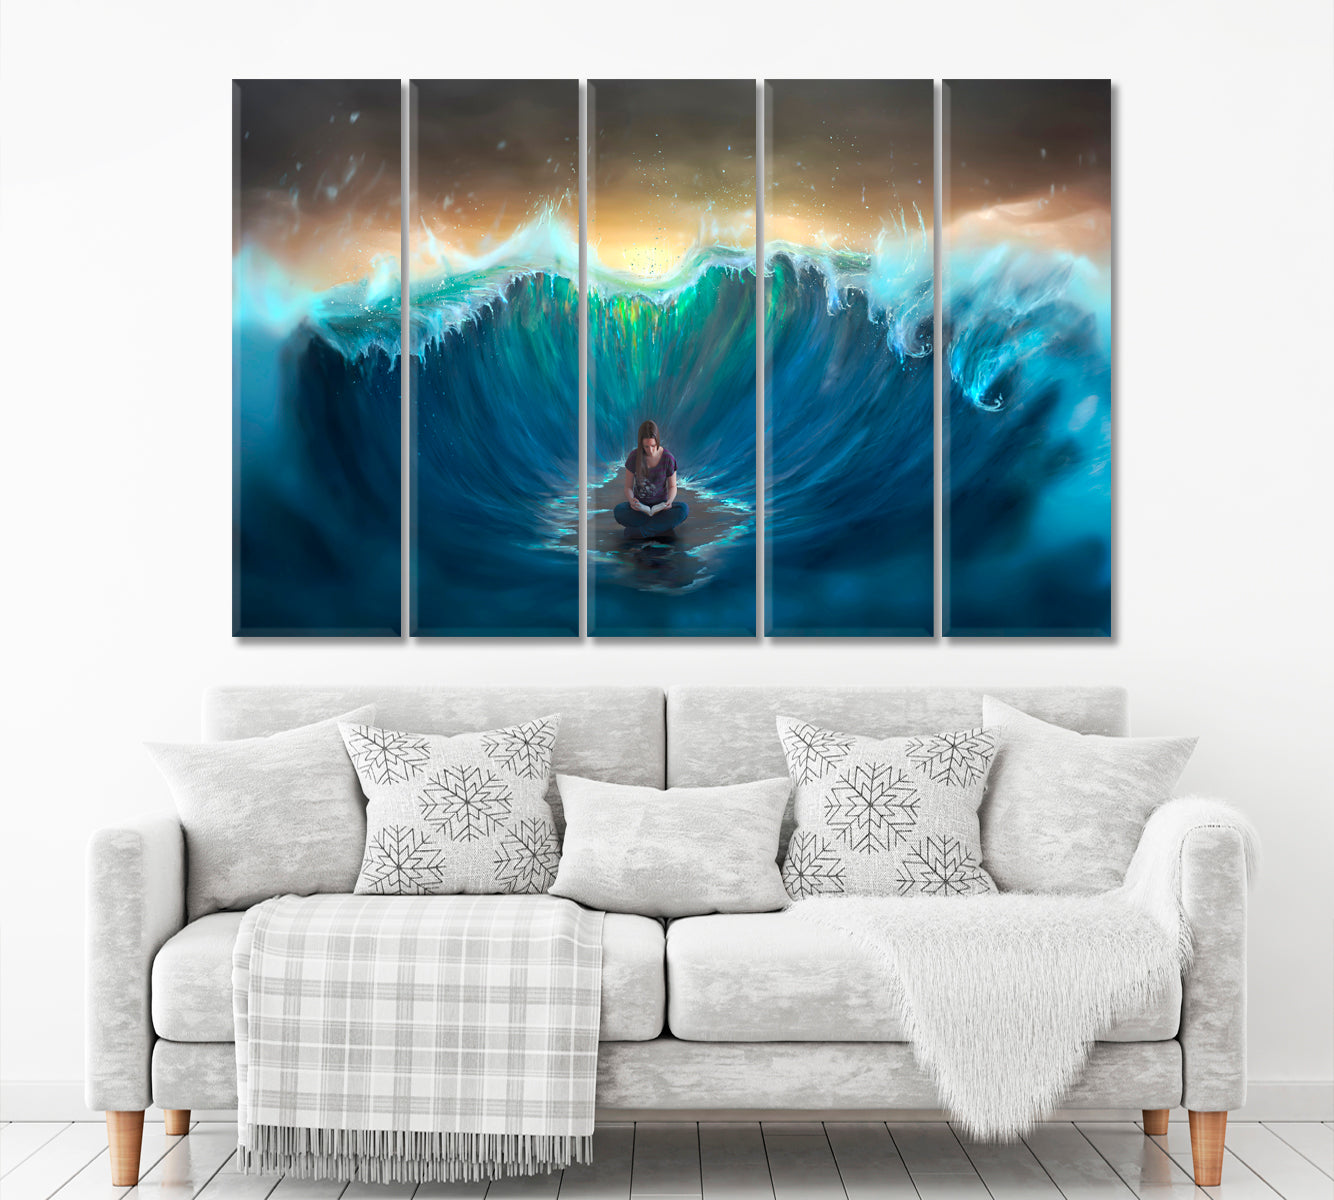 Woman Surrounded By Sea Waves Motivation Sport Poster Print Decor Artesty 5 panels 36" x 24" 